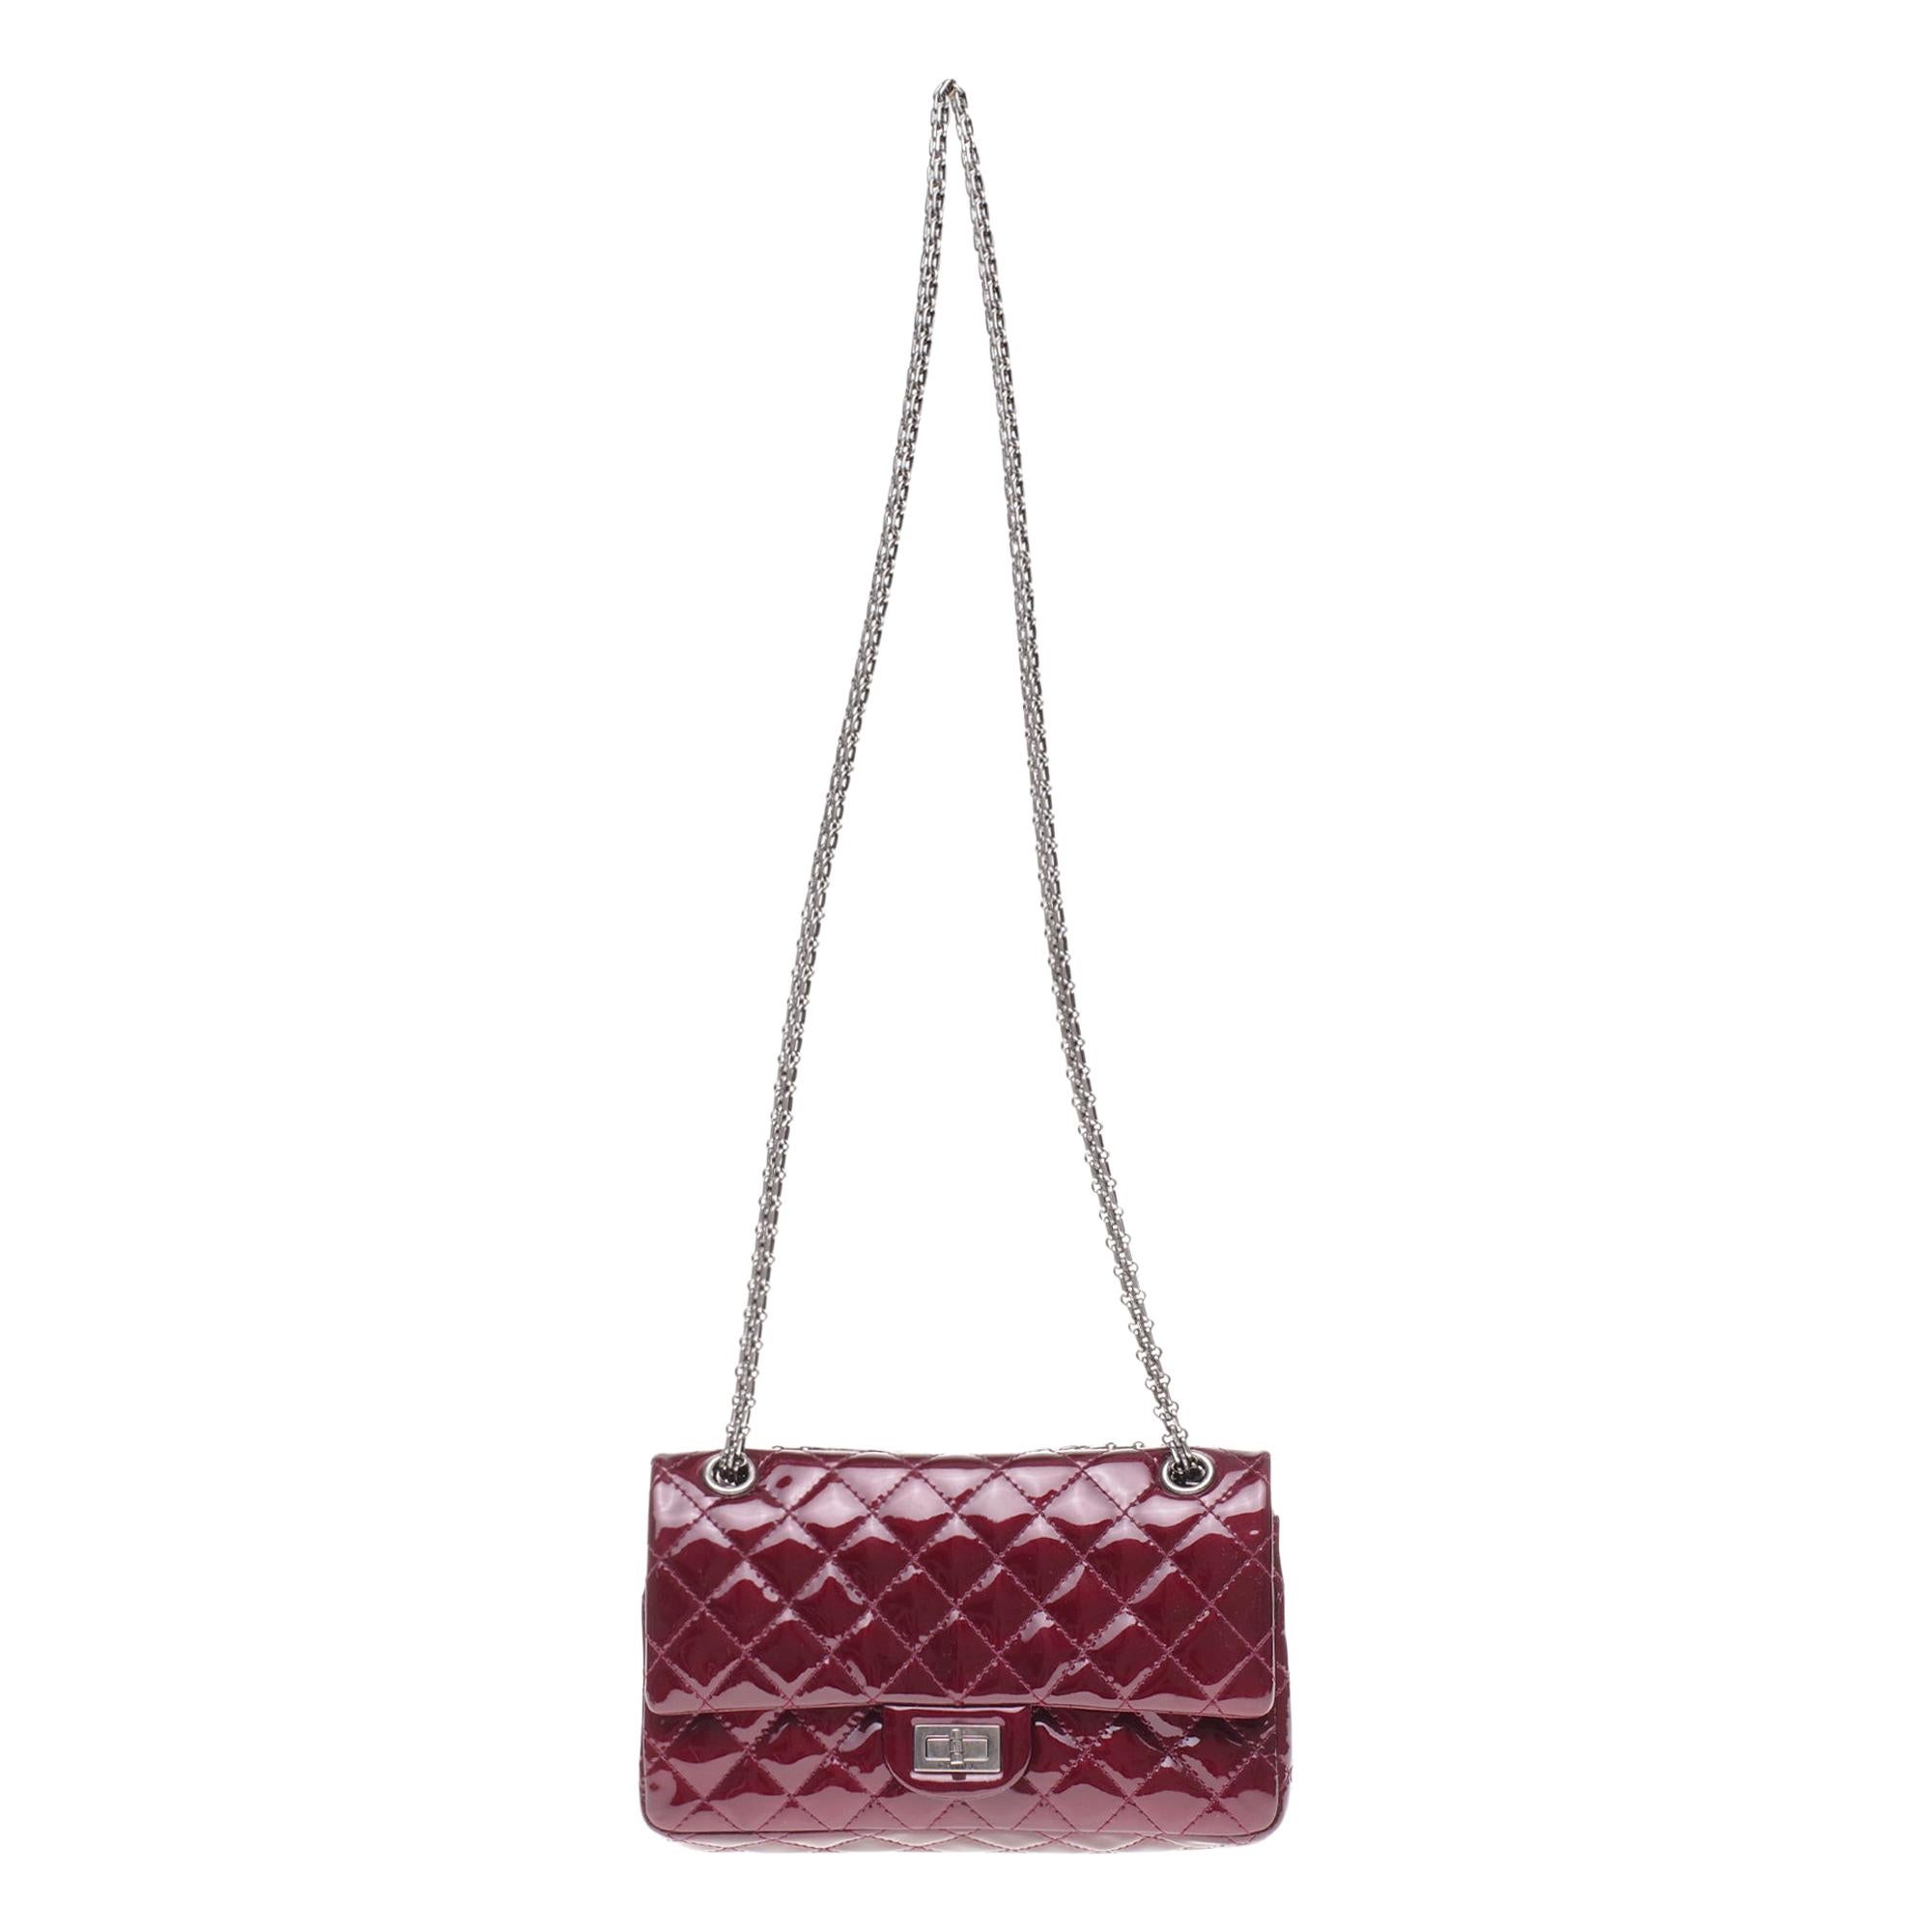 Beautiful Chanel 2.55 Reissue shoulder bag in burgundy quilted